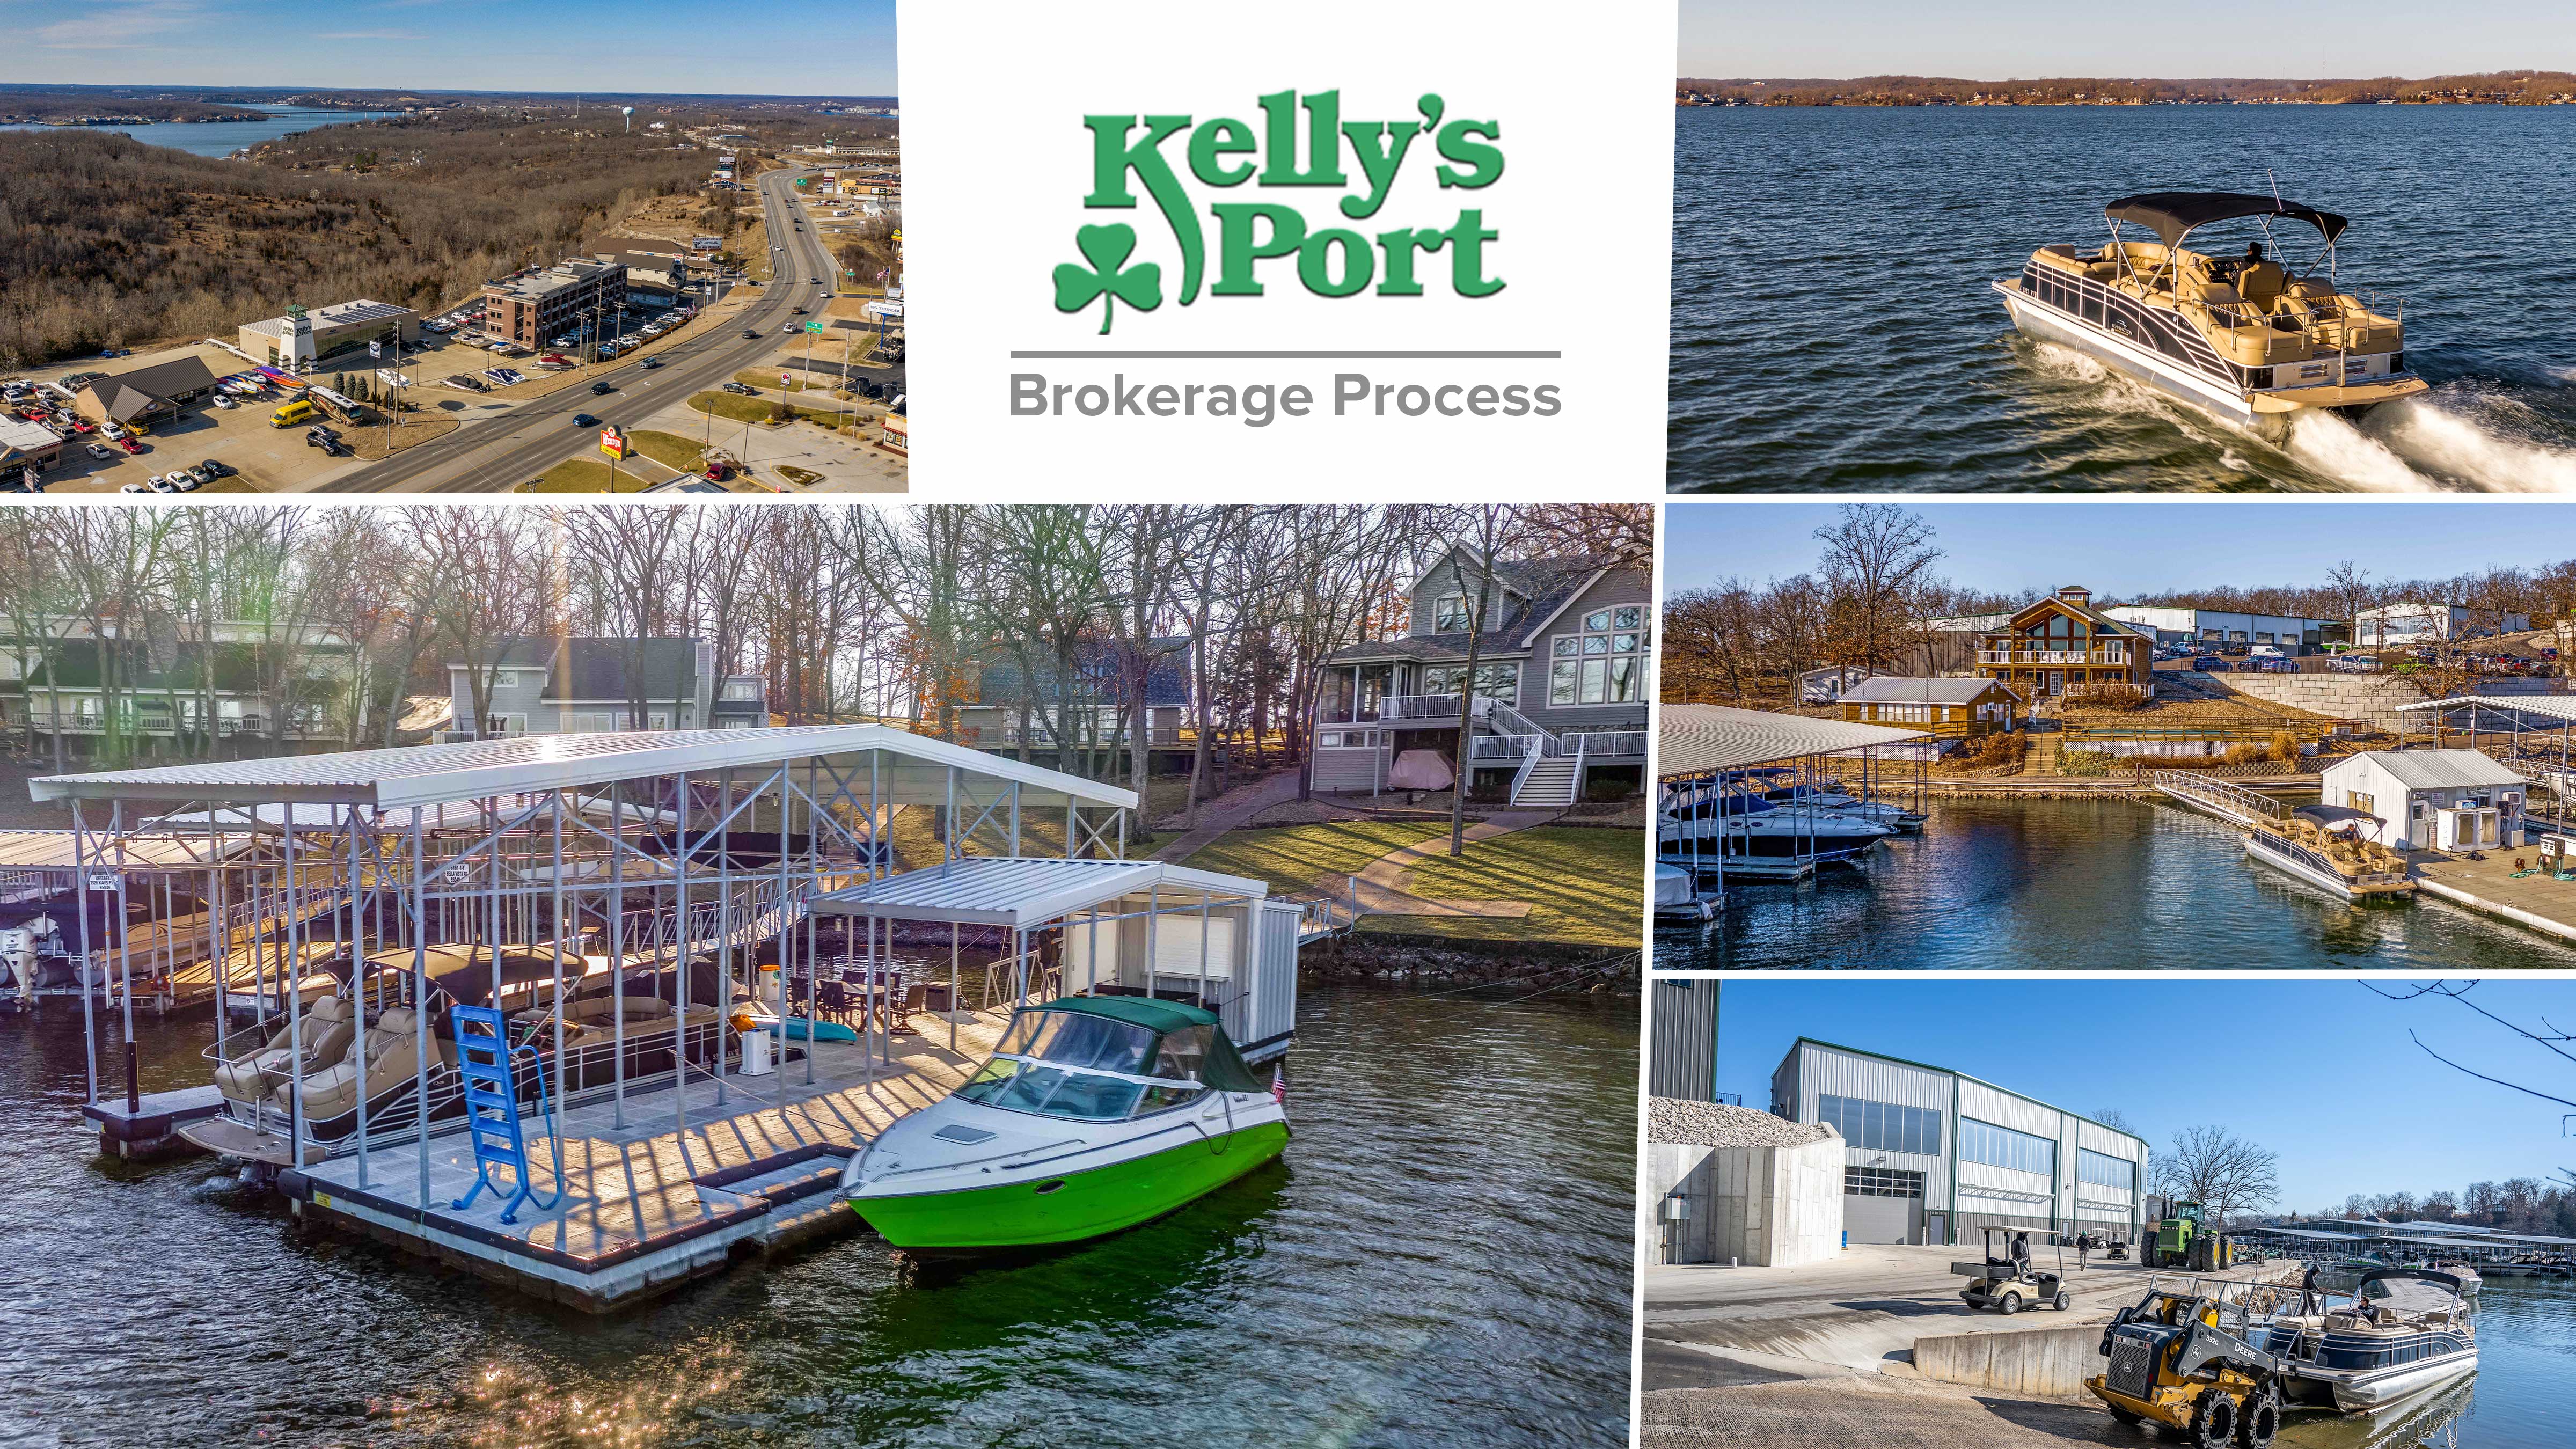 Views of the surrounding forested areas of Kelly's Port on Lake of the Ozarks, including their docks and inventory